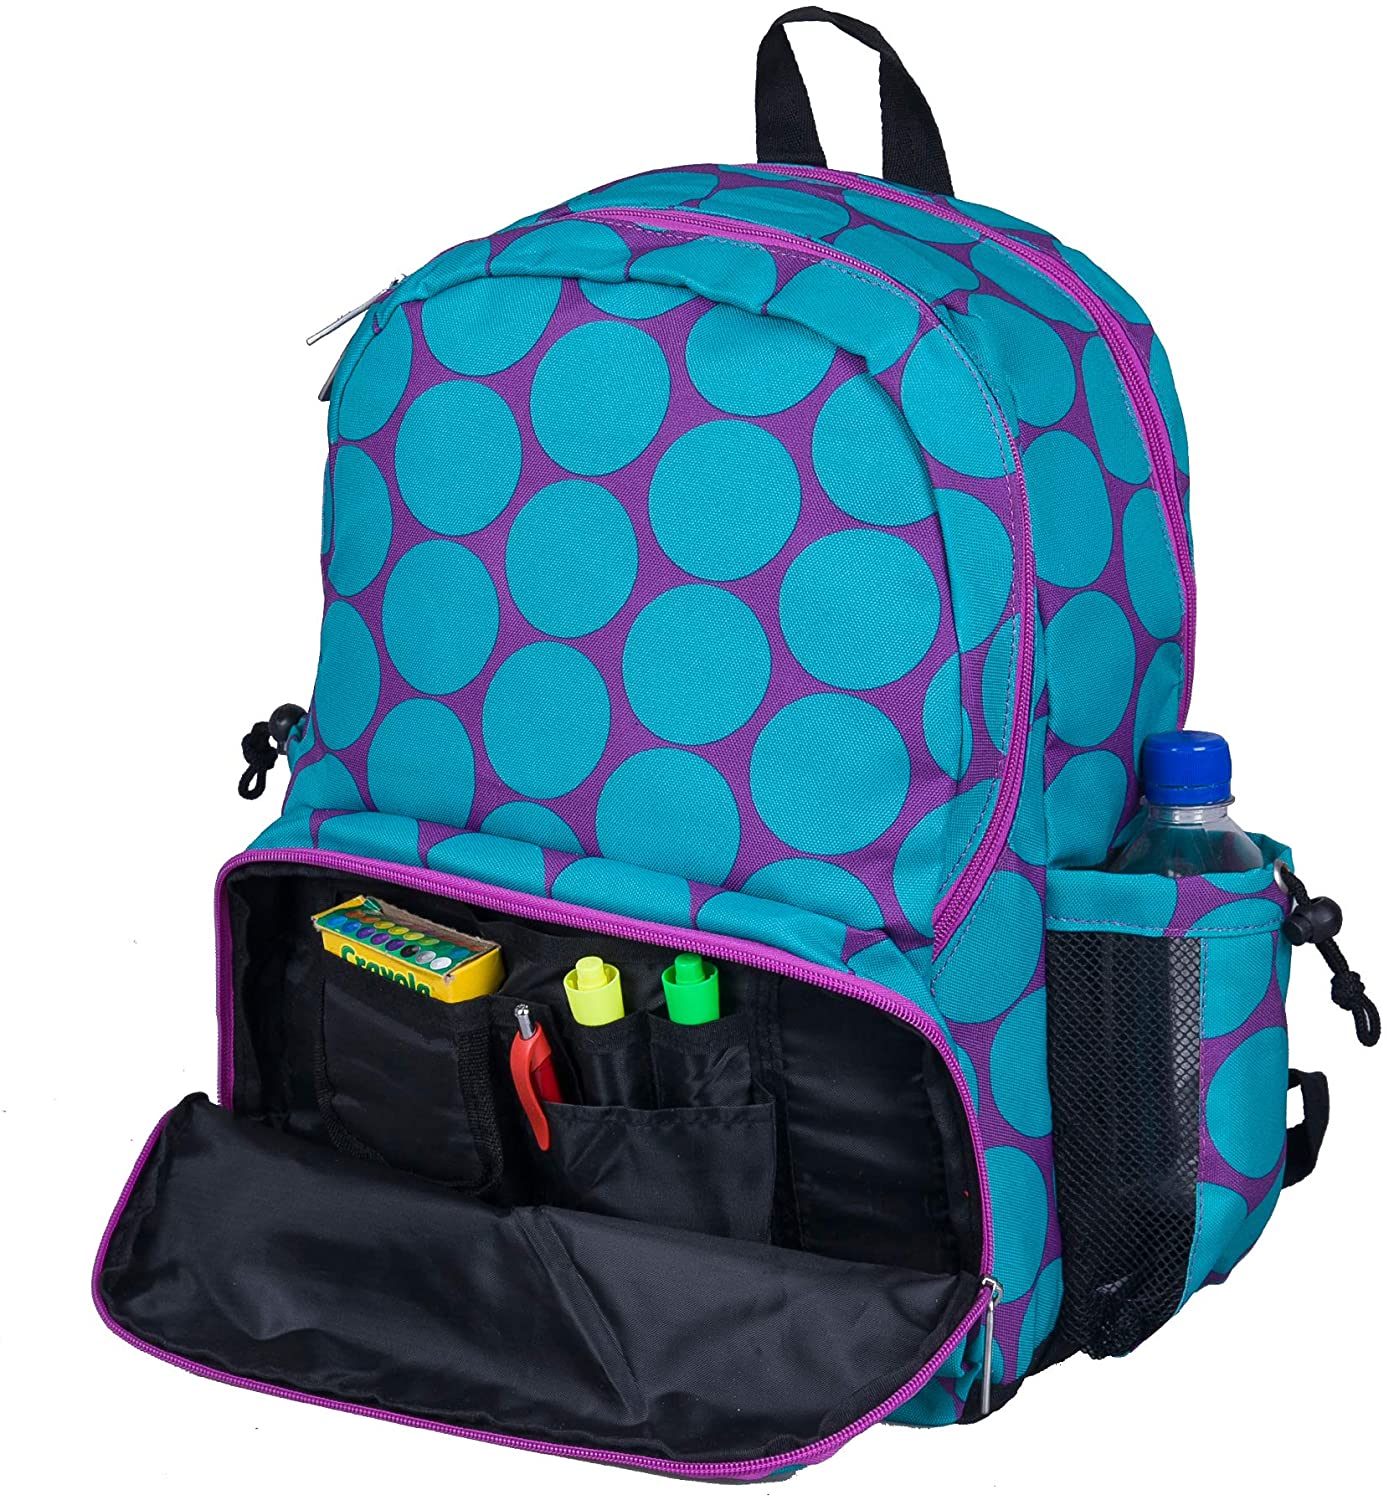 Wildkin Kids 17 Inch Backpack for Boys and Girls, Perfect for School and Travel (Big Dot Aqua) - image 5 of 7